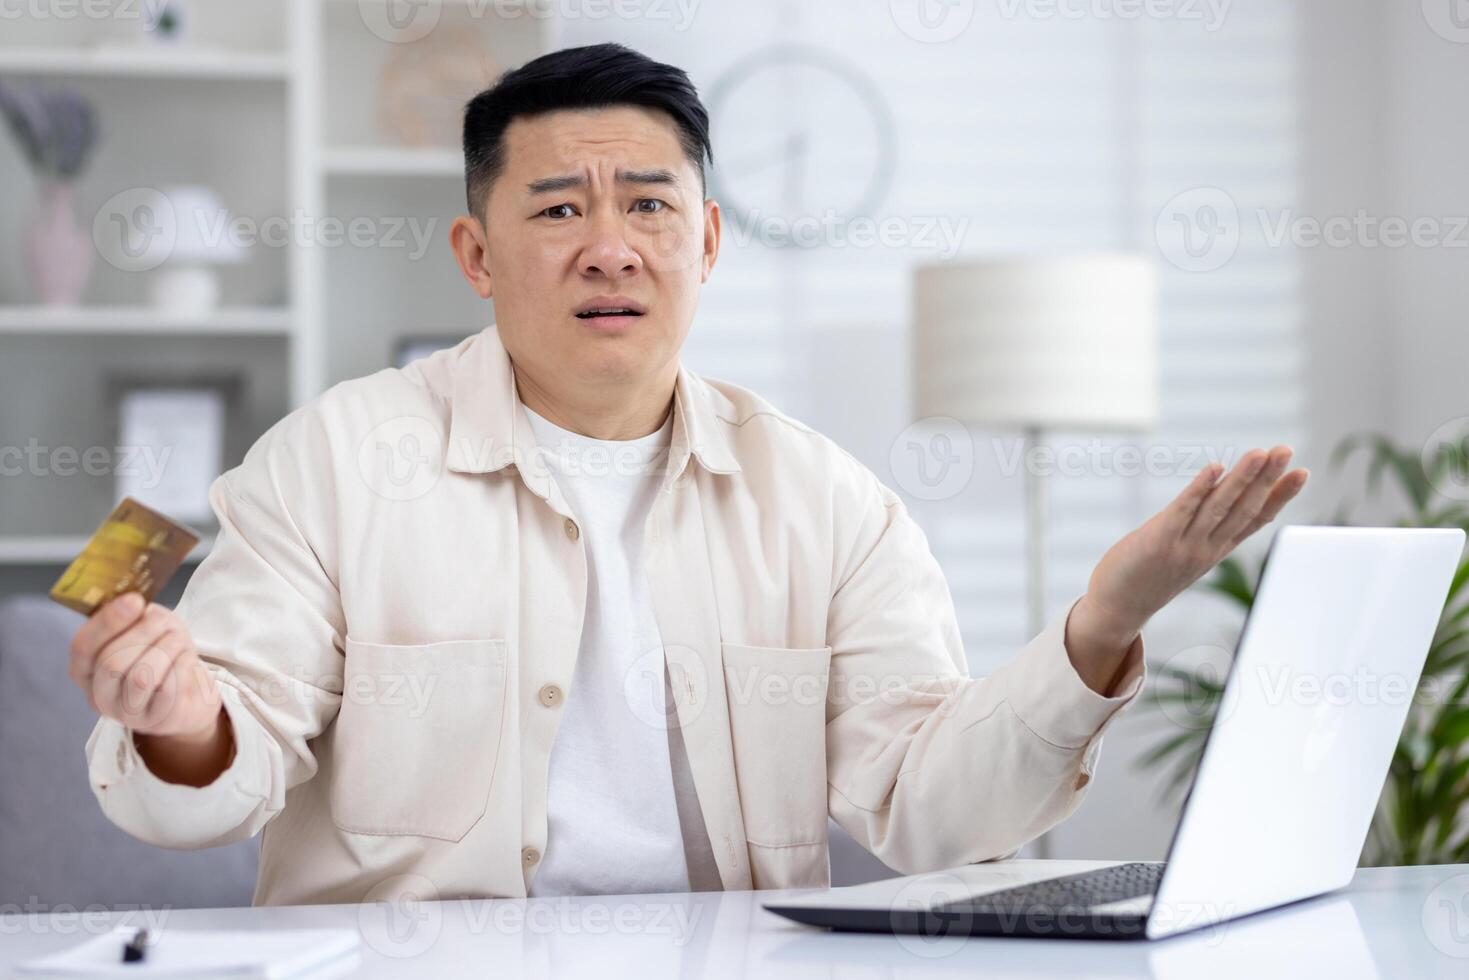 Confused asian man sitting in light office at table in front of laptop, holding card in hand, upset about failed online shopping, broken computer, failed online transaction. photo